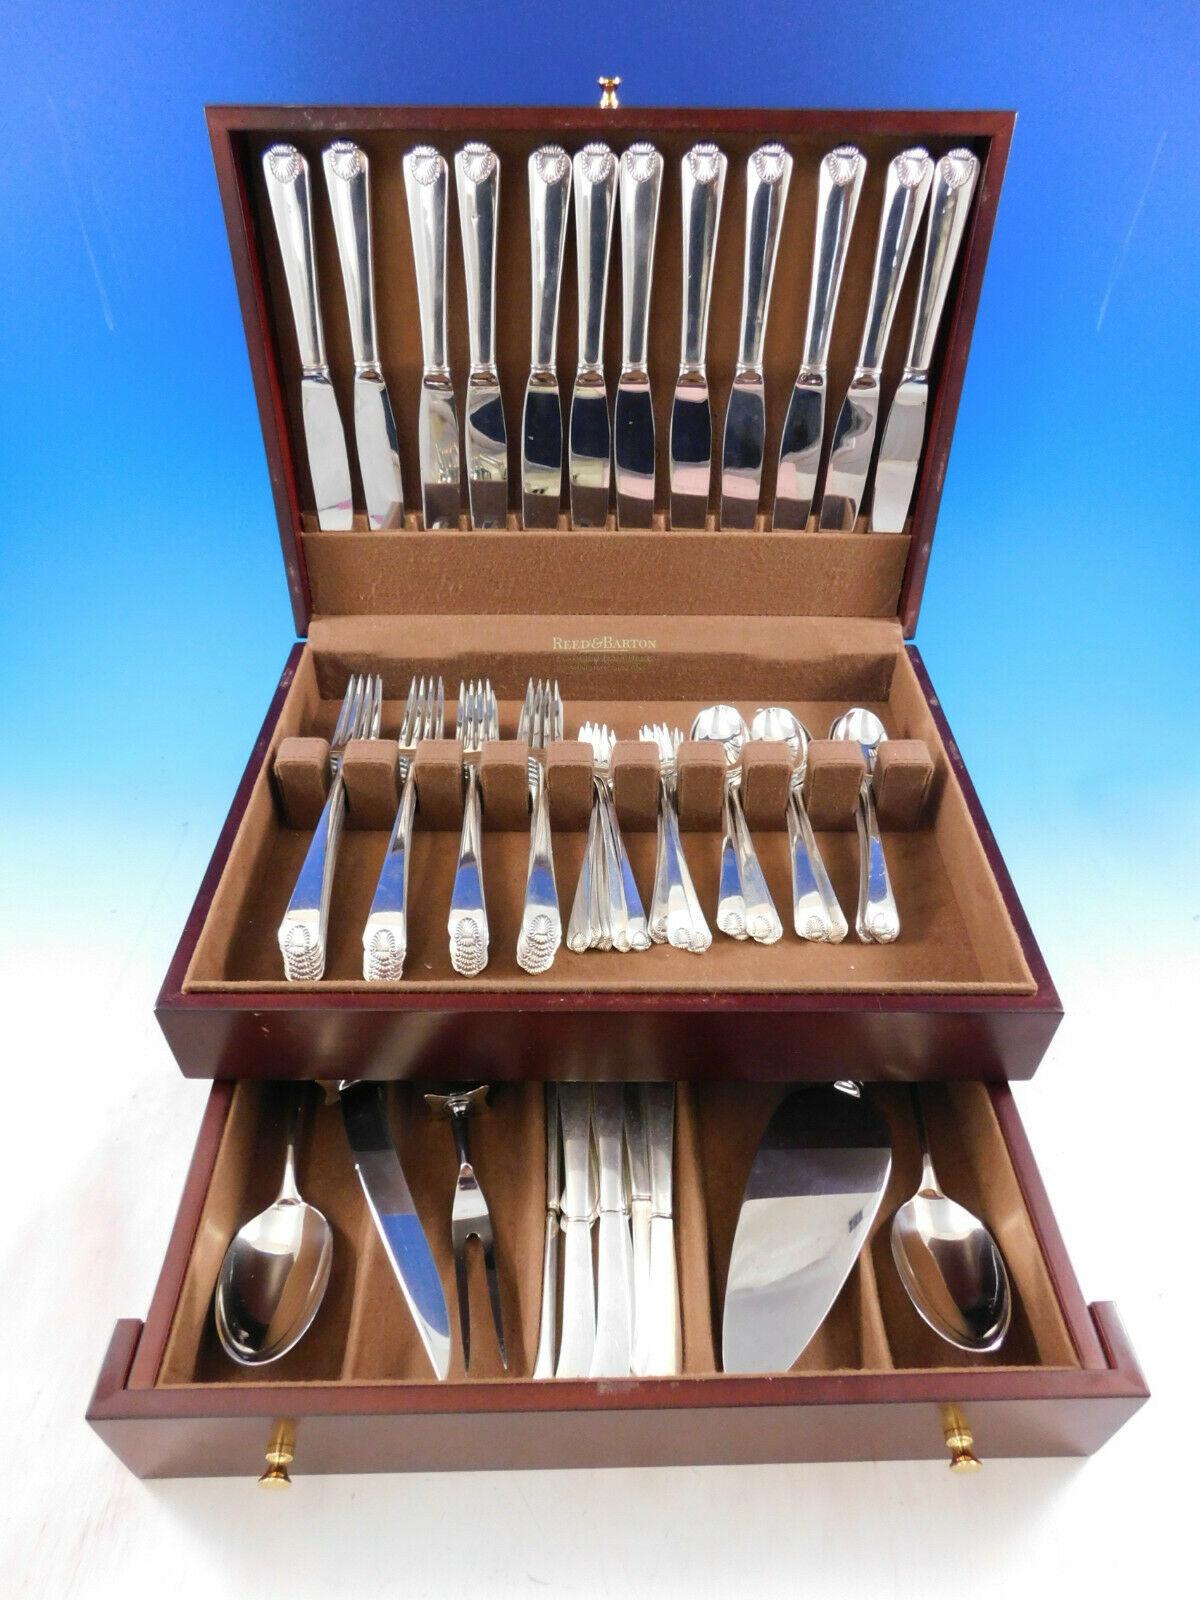 Scarce Dinner Size Colonial Shell by International Sterling Silver Flatware set - 77 pieces. This set includes:

12 dinner size knives, 9 7/8